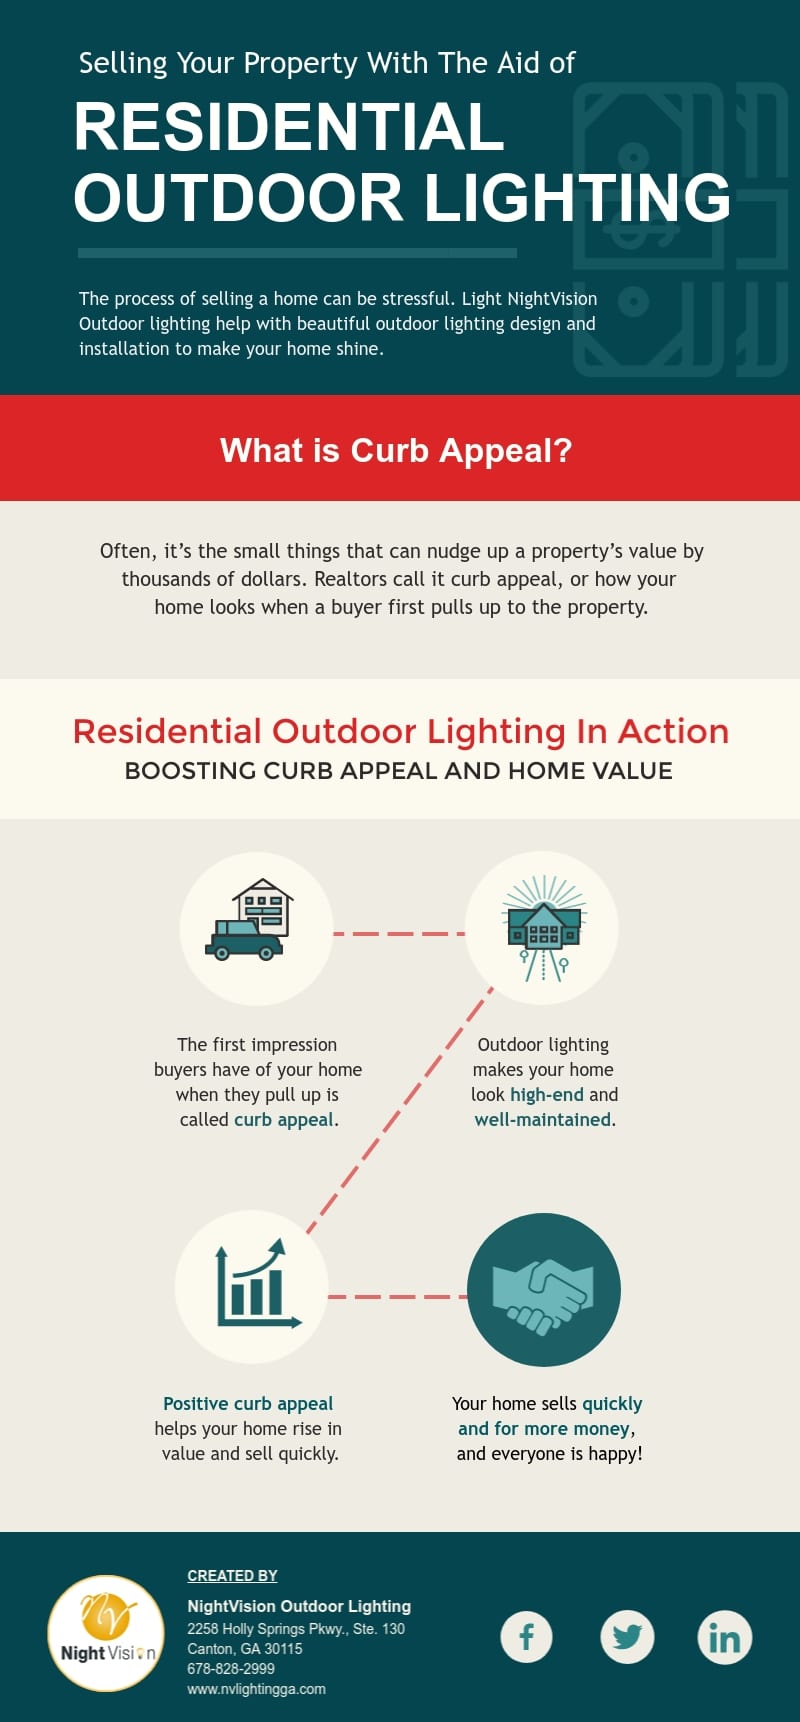 Sell Your Property Easily With Residential Outdoor Lighting